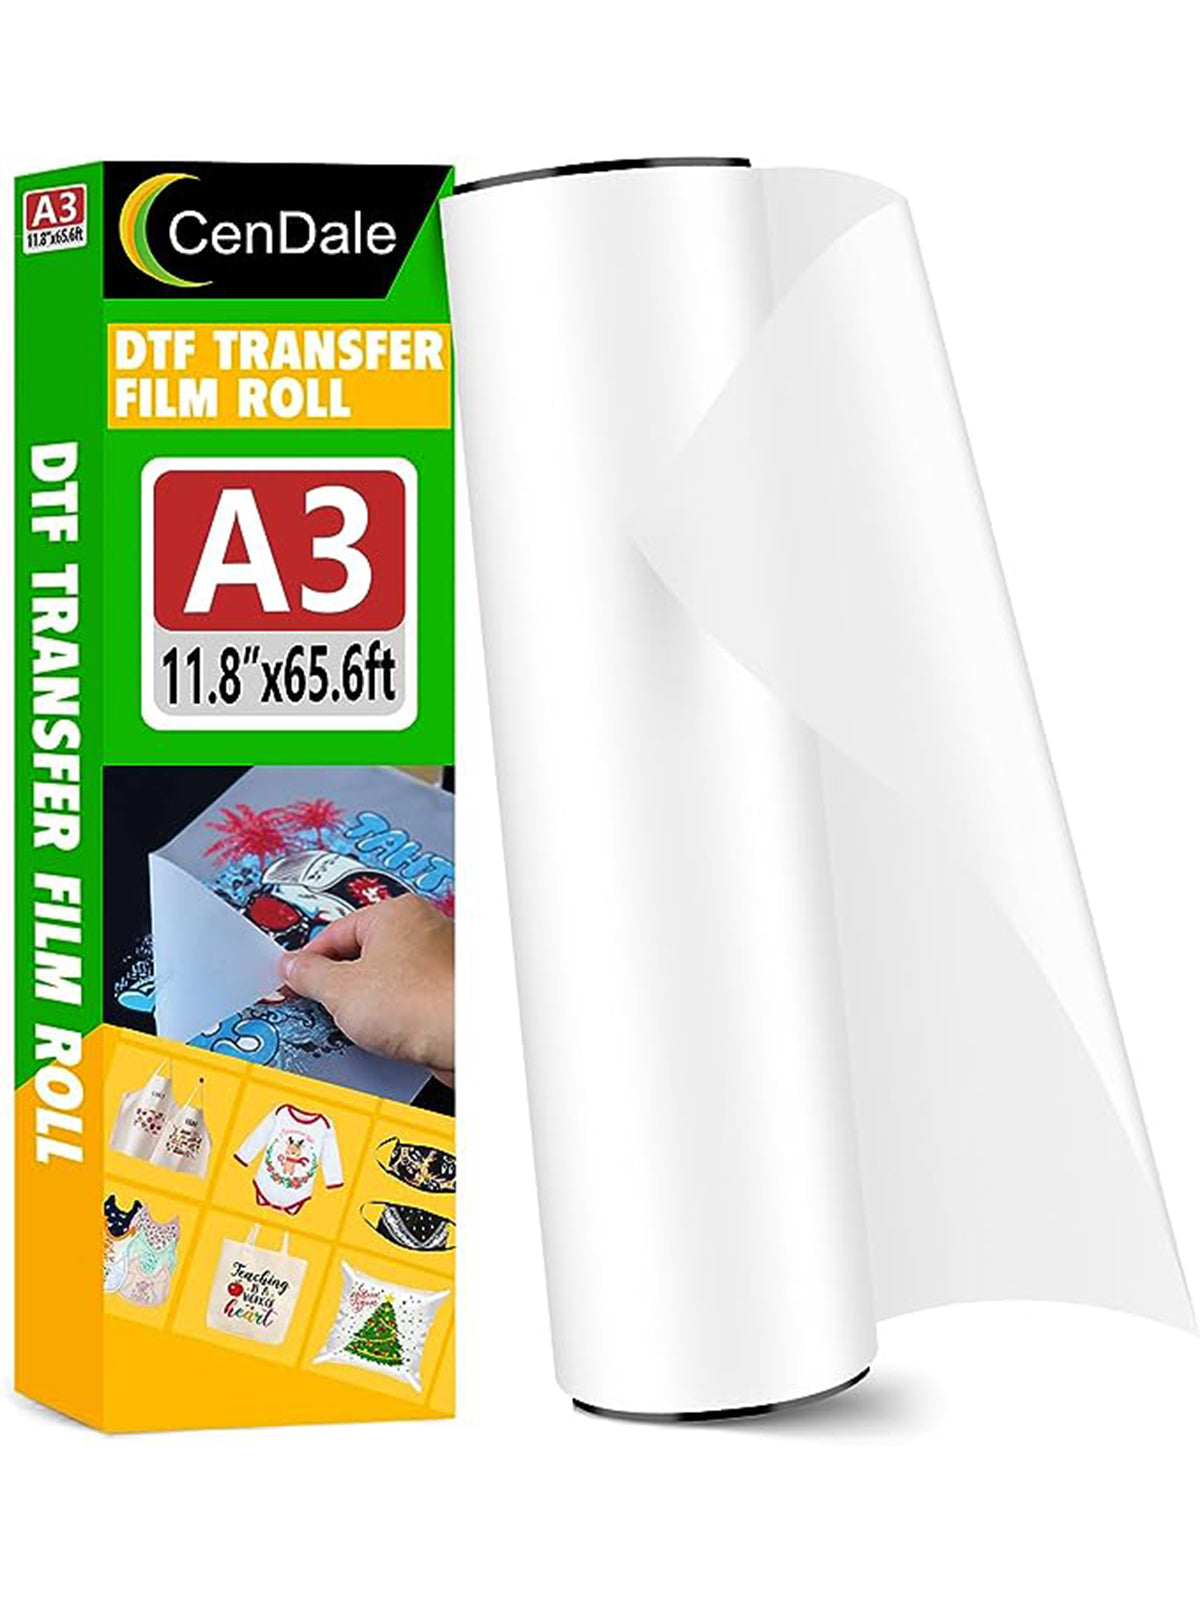 CenDale Glossy DTF Transfer Film 8.5x11 - 30 Sheets